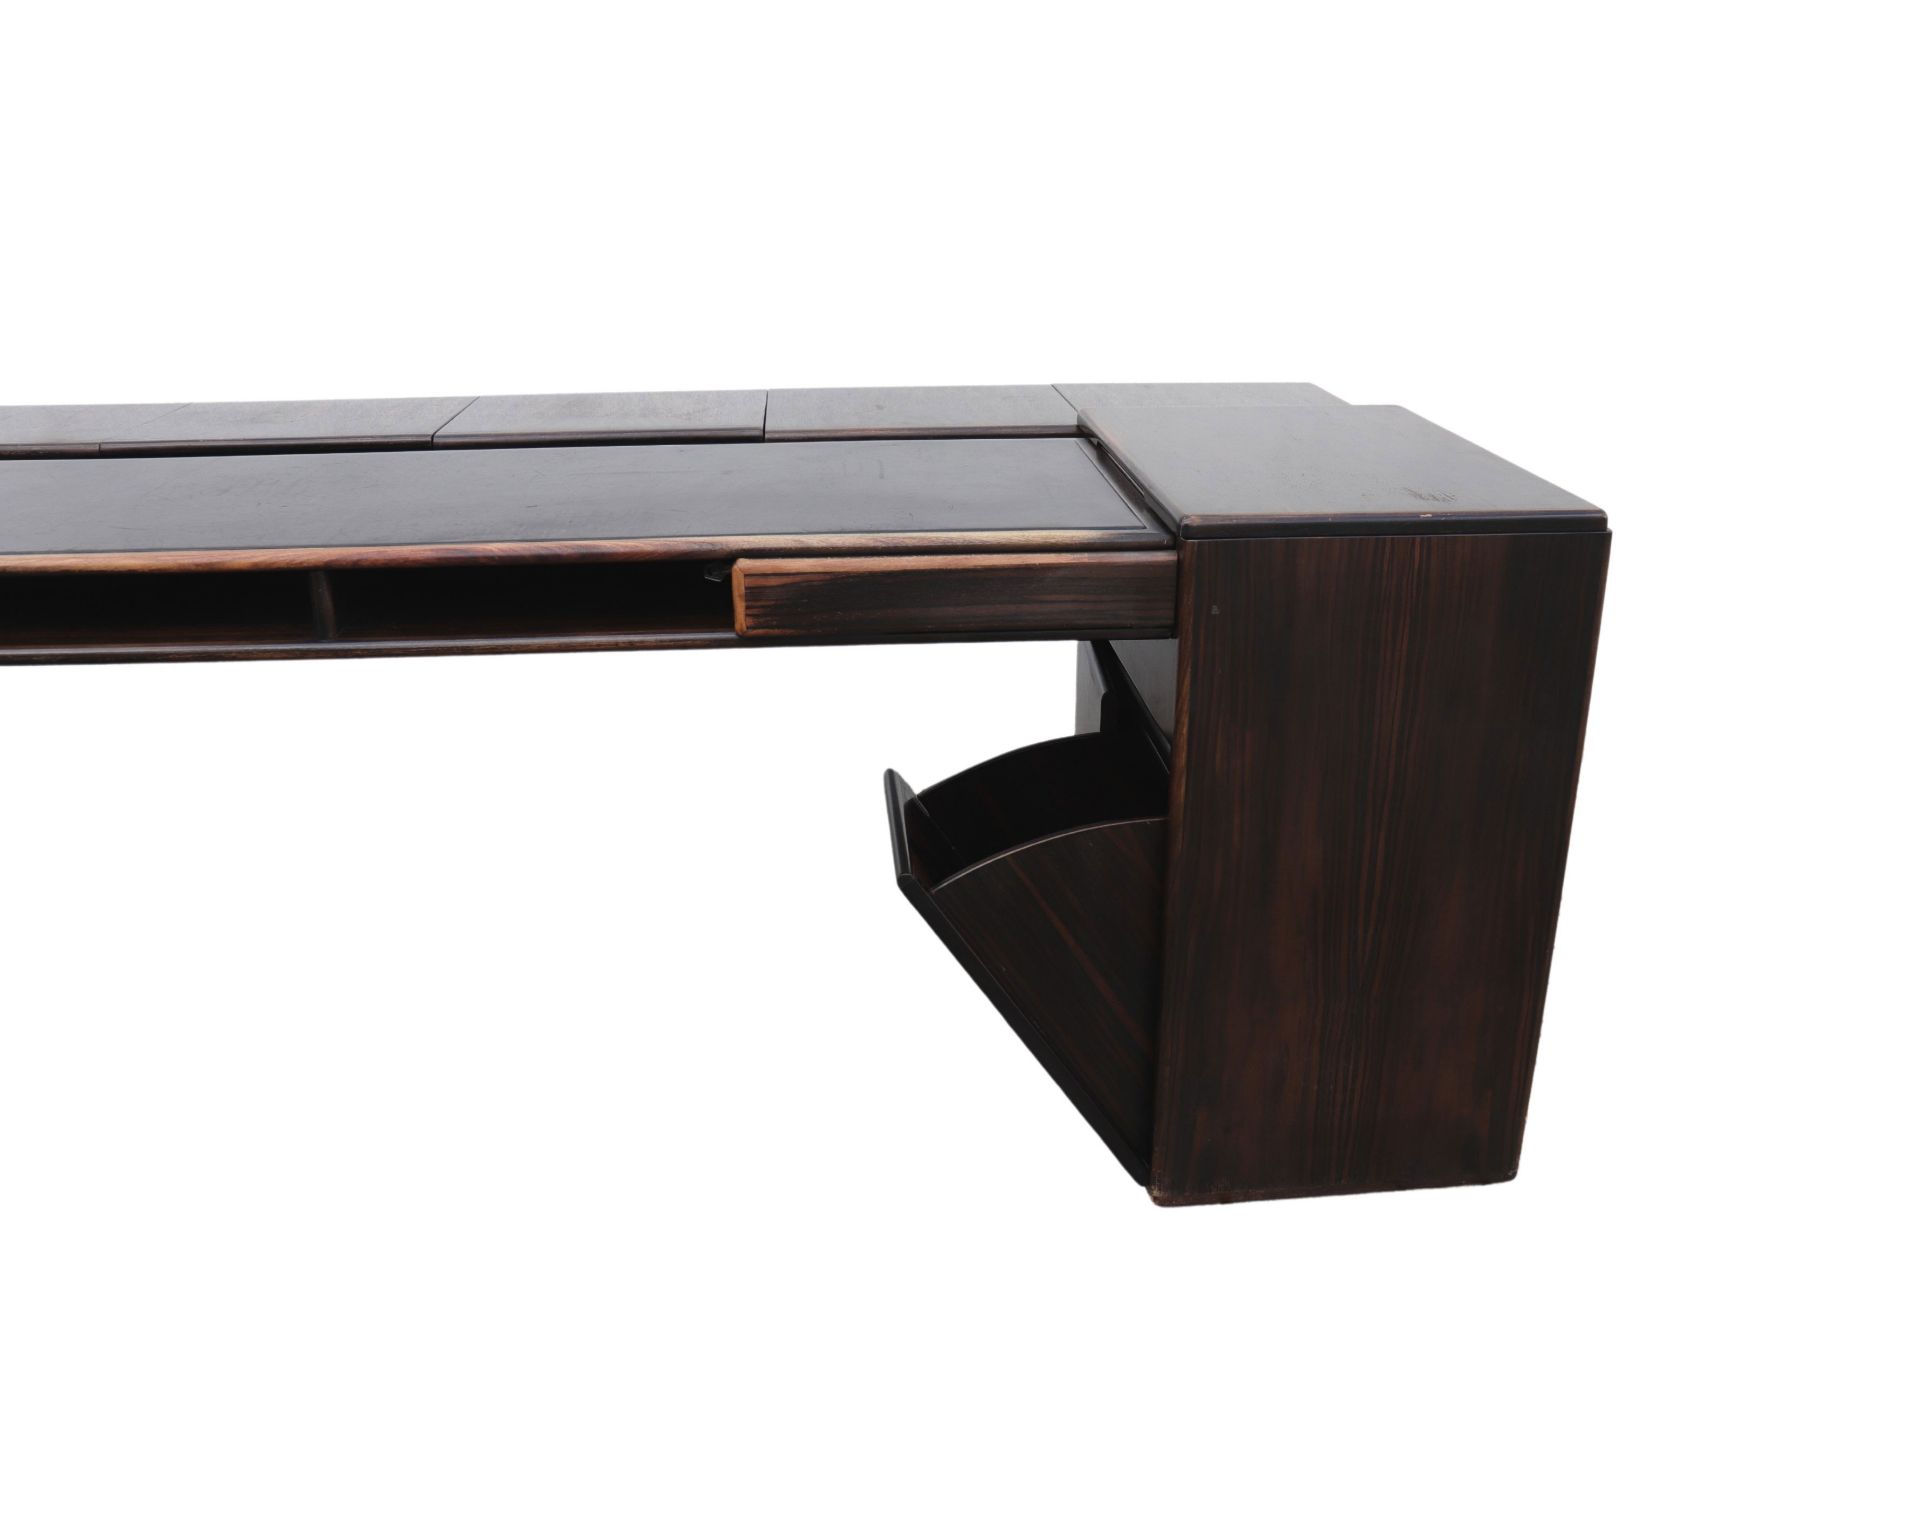 Exceptional large rosewood desk with multiple storage Bernini house - Image 4 of 6